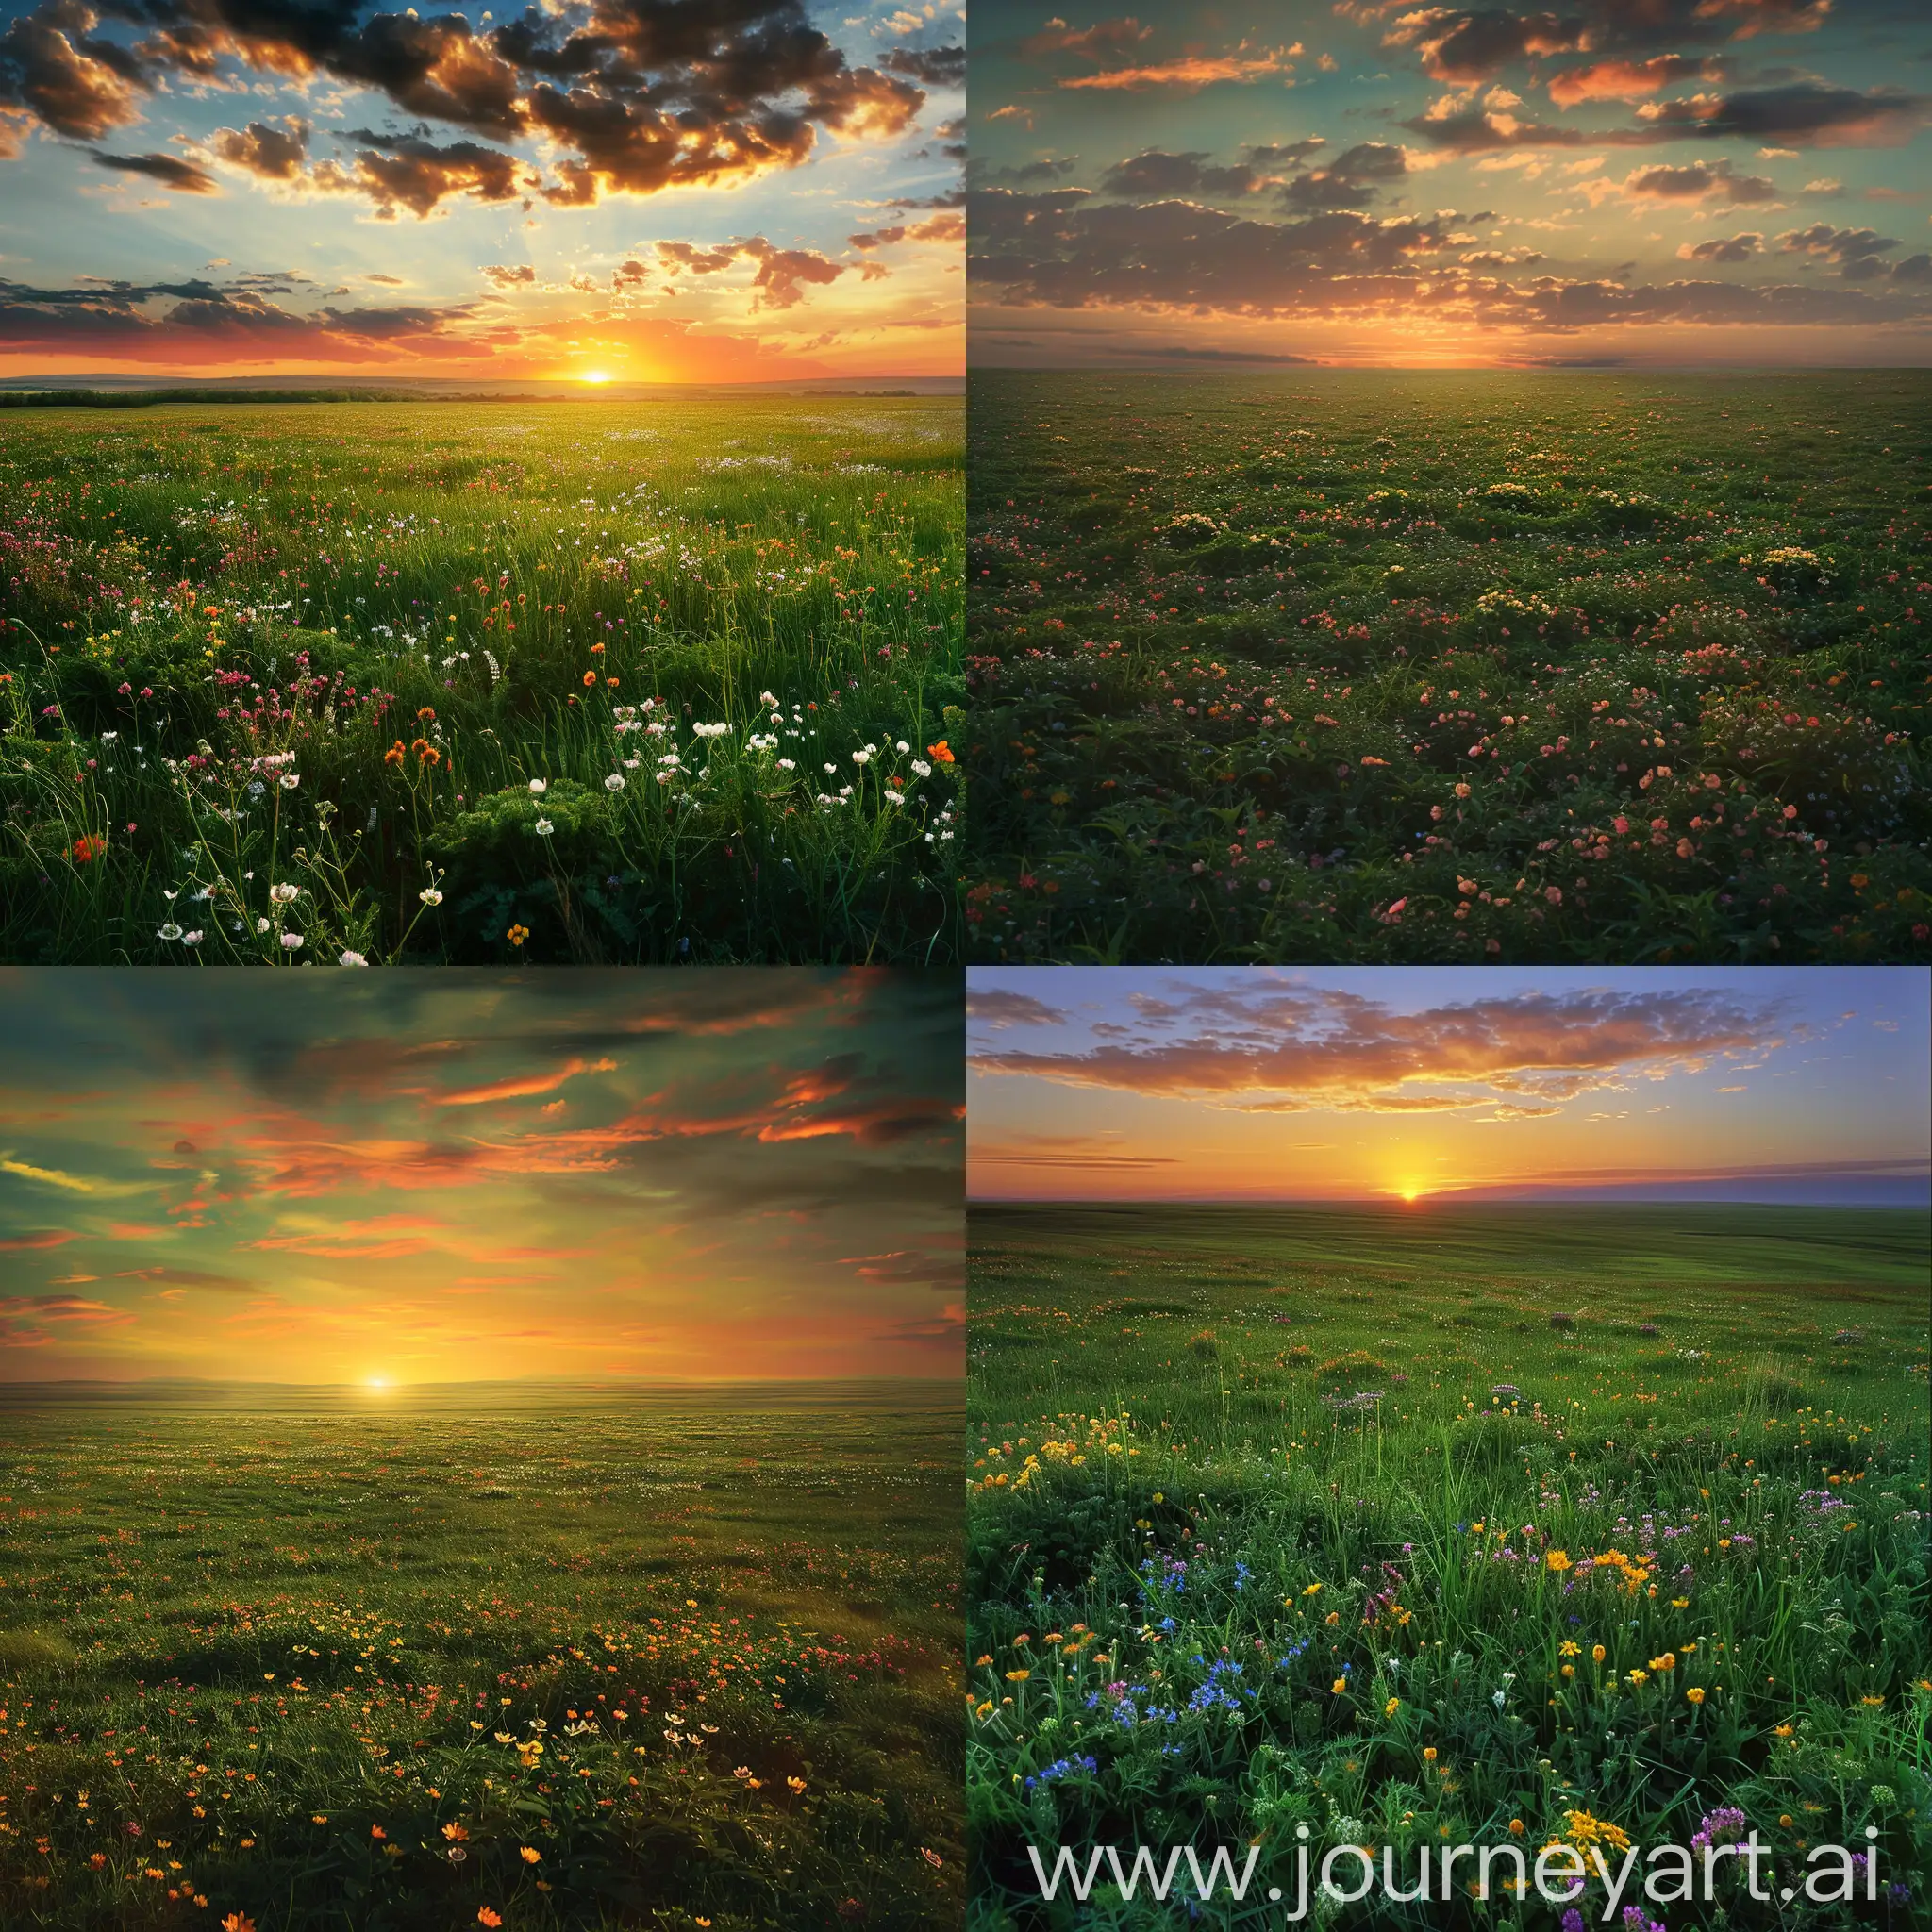 Image Image of a green plain with lots of flowers at sunset and dreamy